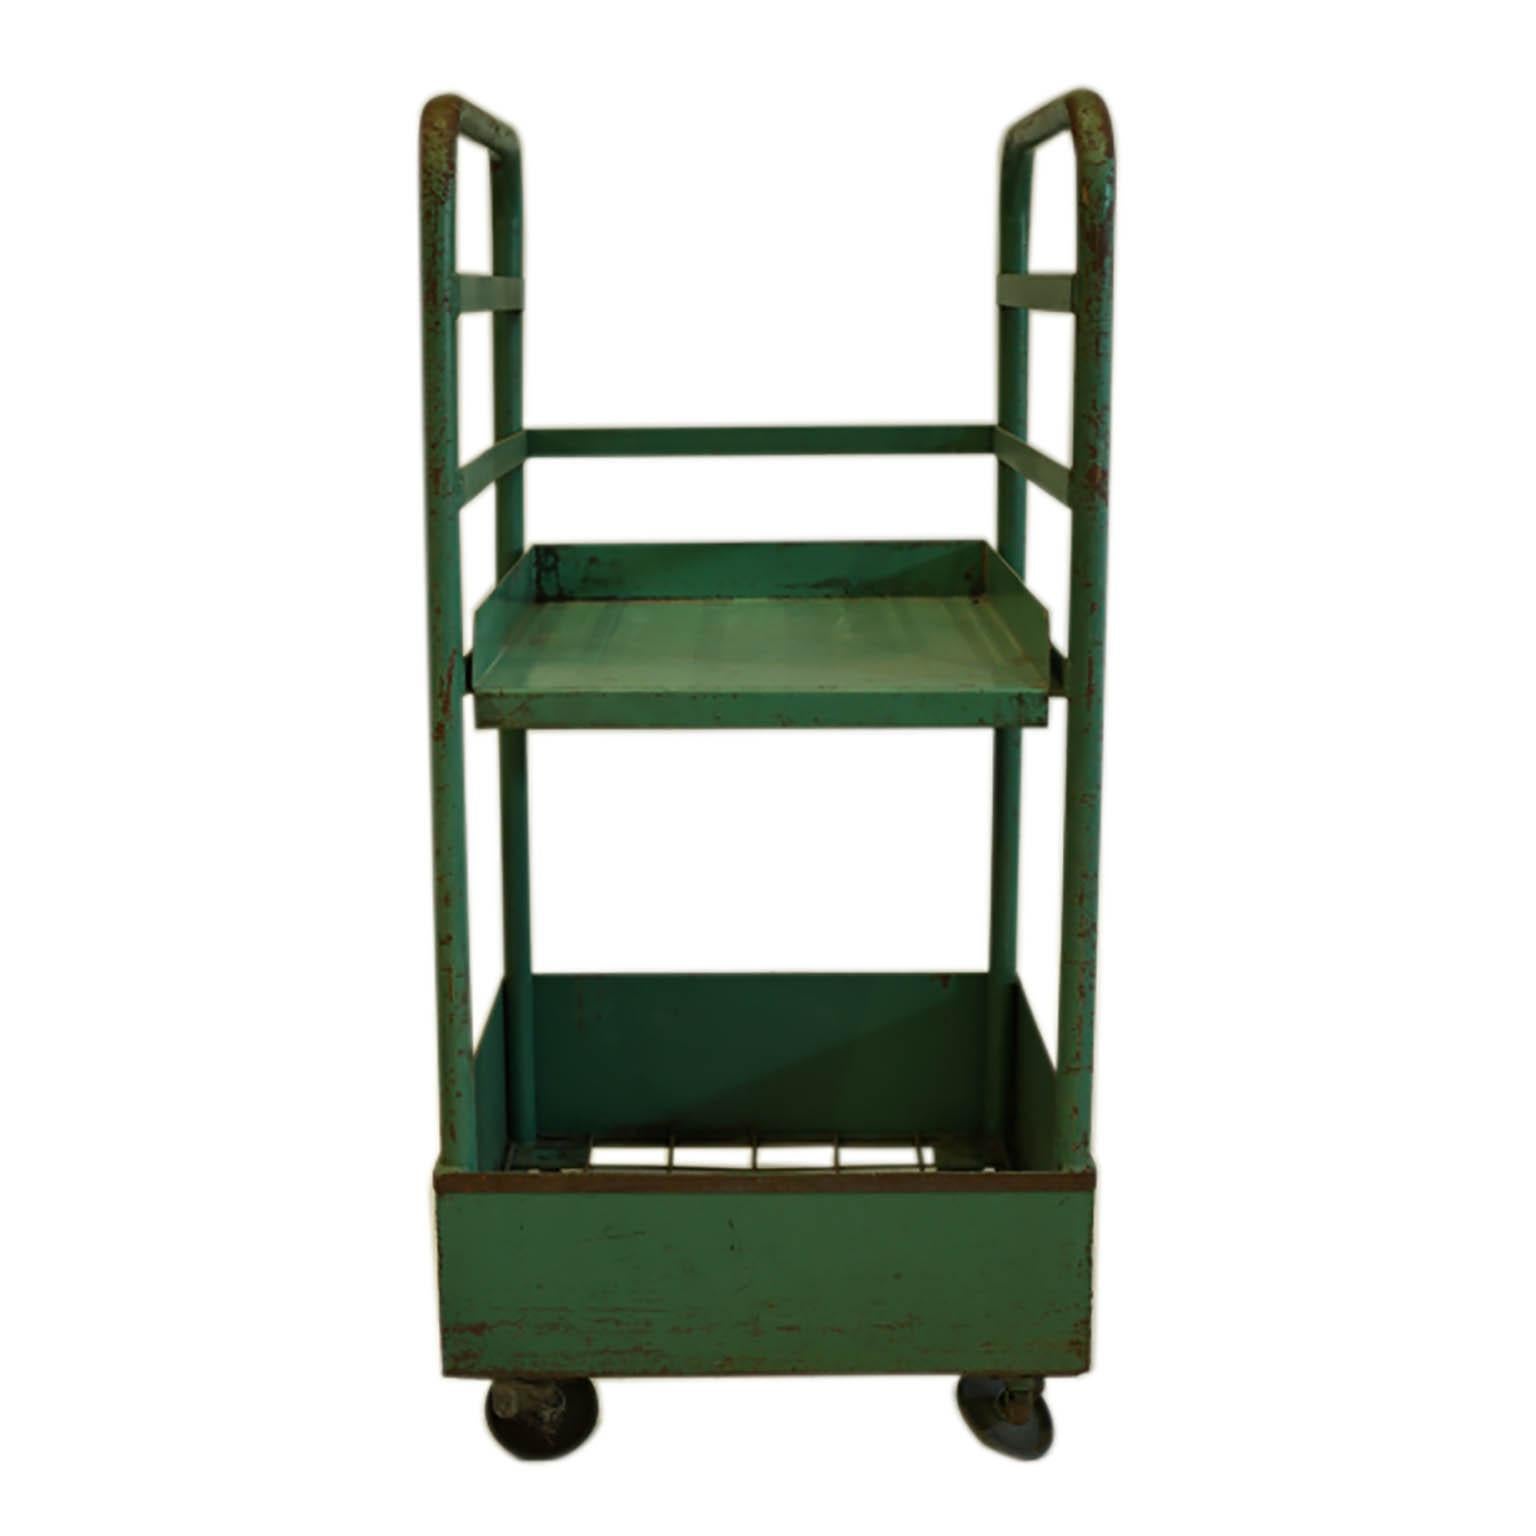 Painted Vintage Rolling Factory Cart with Removable Tray, circa 1940s